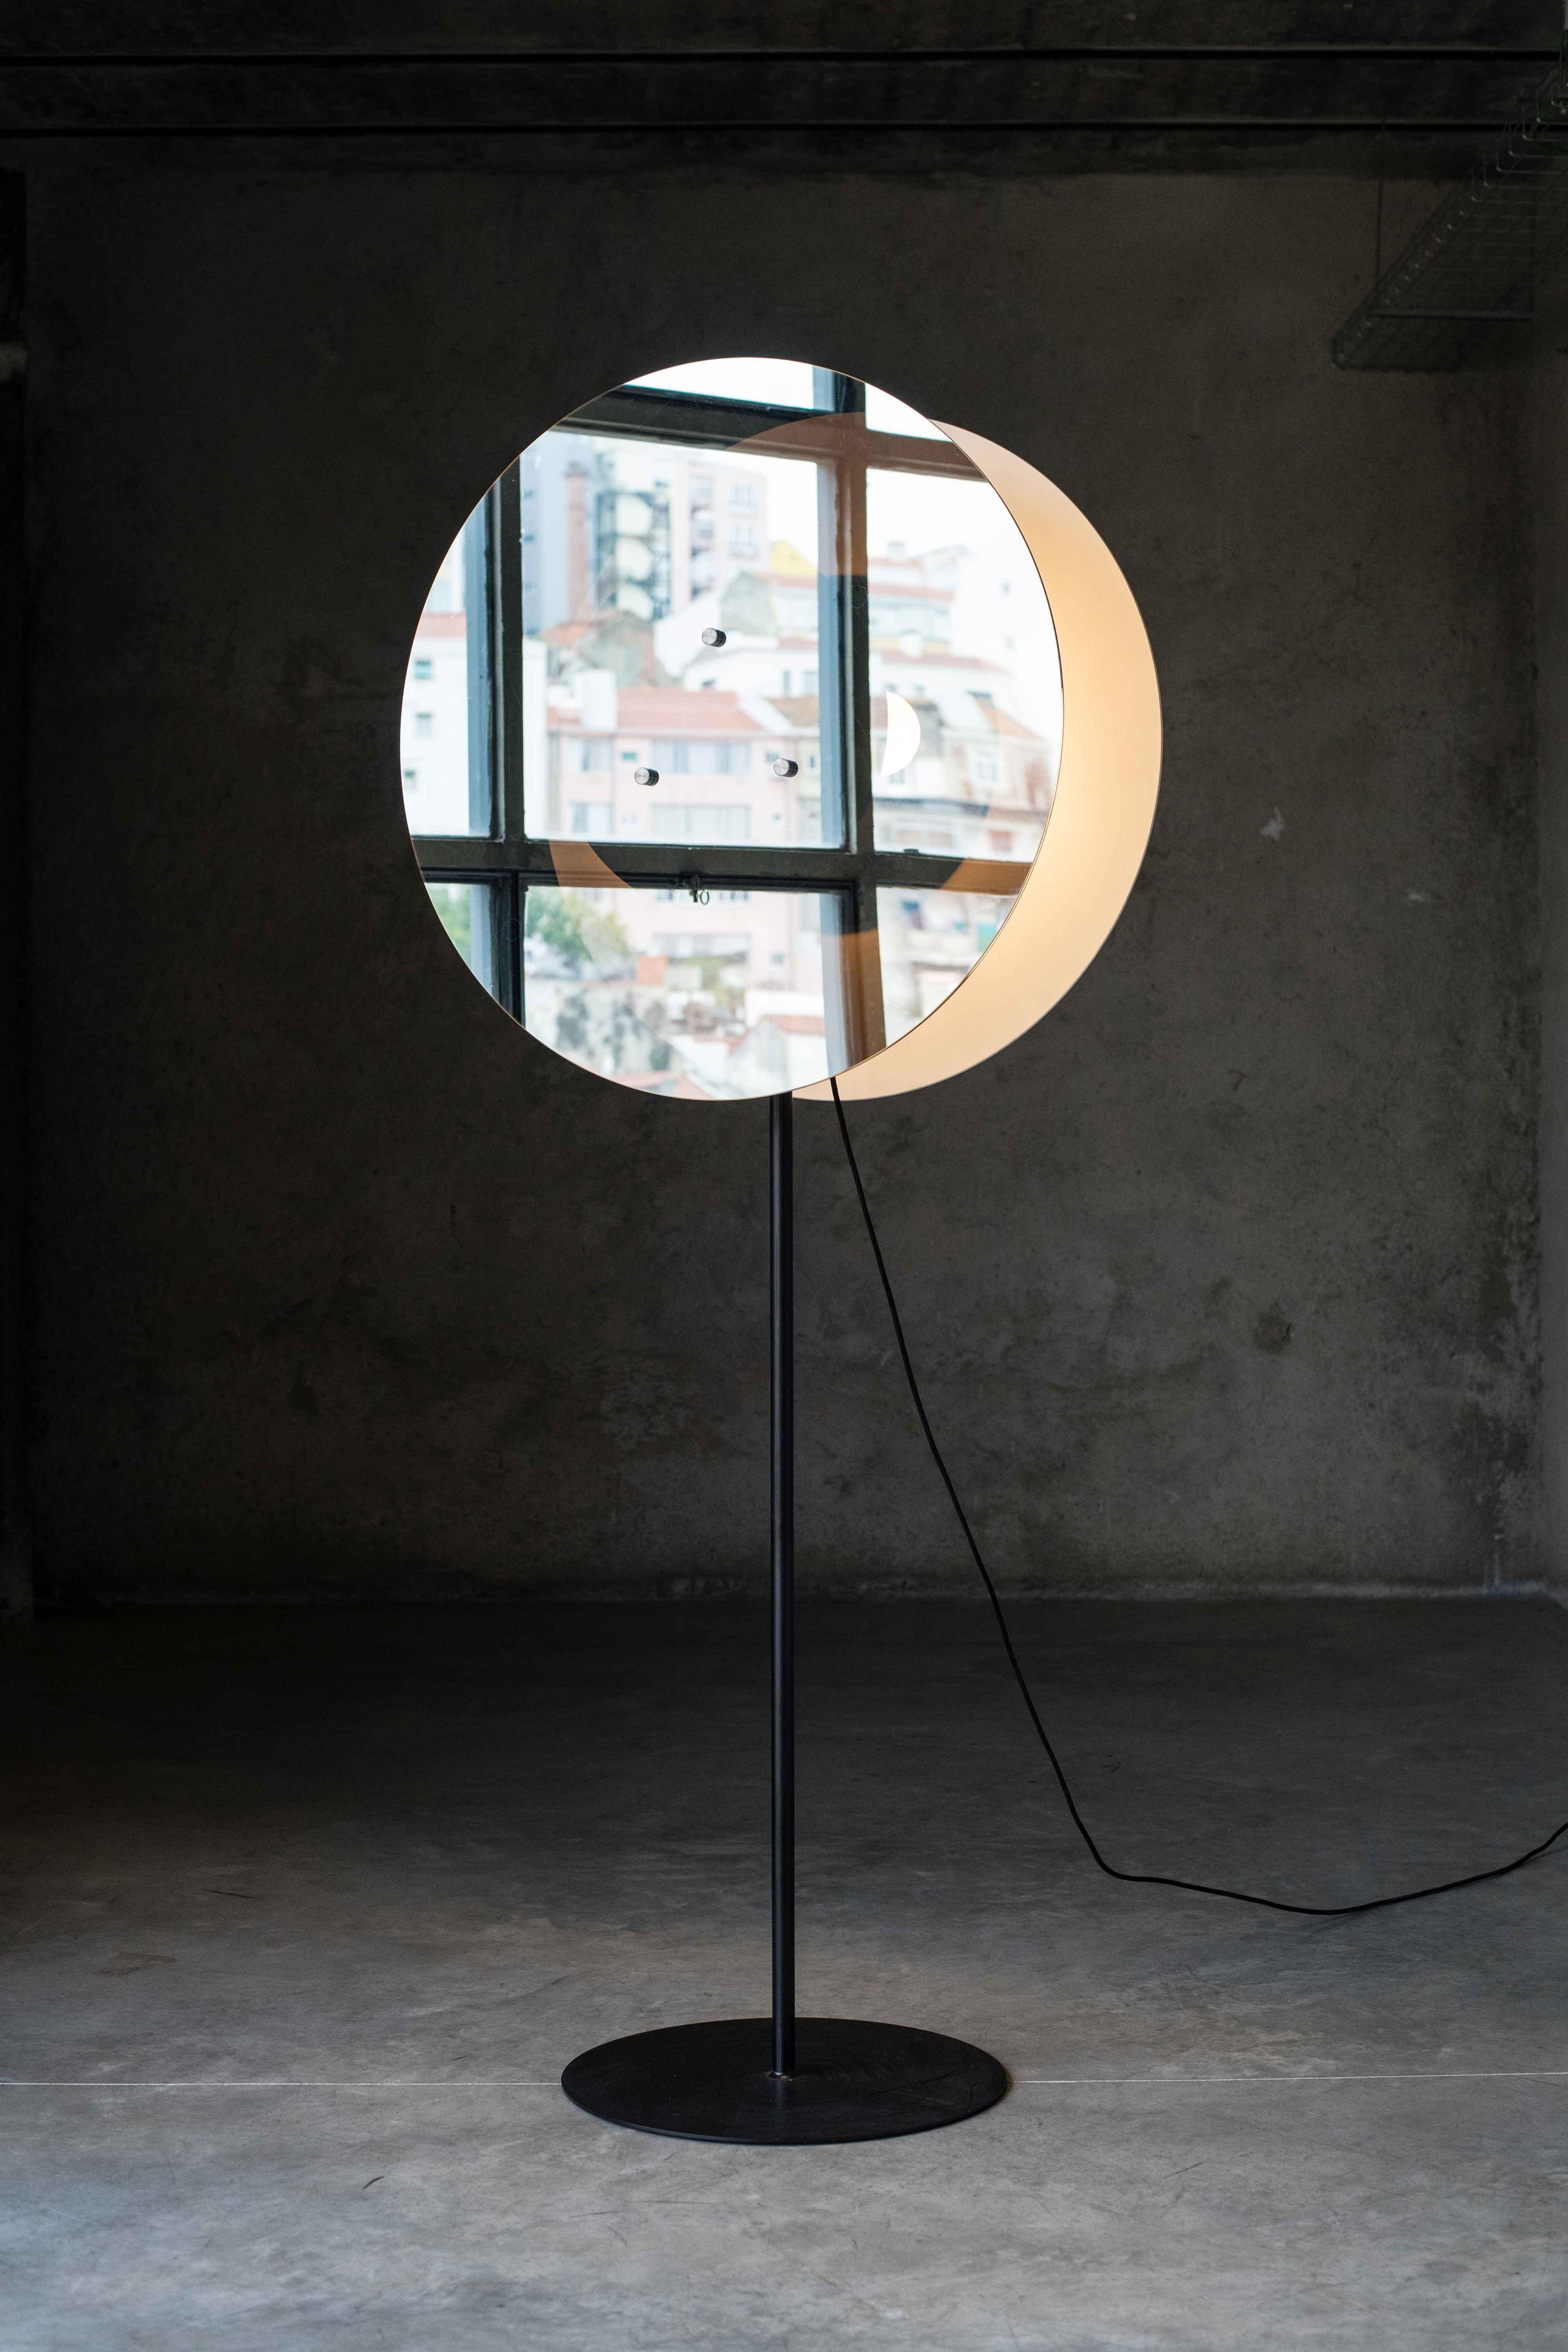 In between a lamp by MOB 
Limited editions of 15 + 1 prototype
Designer: Javier Toro Blum (Chile)
Dimensions: H 175 x D 40 
Material: Steel structure, one-way mirror glass, bulbs, black cable

A beam of light is contained in two oval walls who